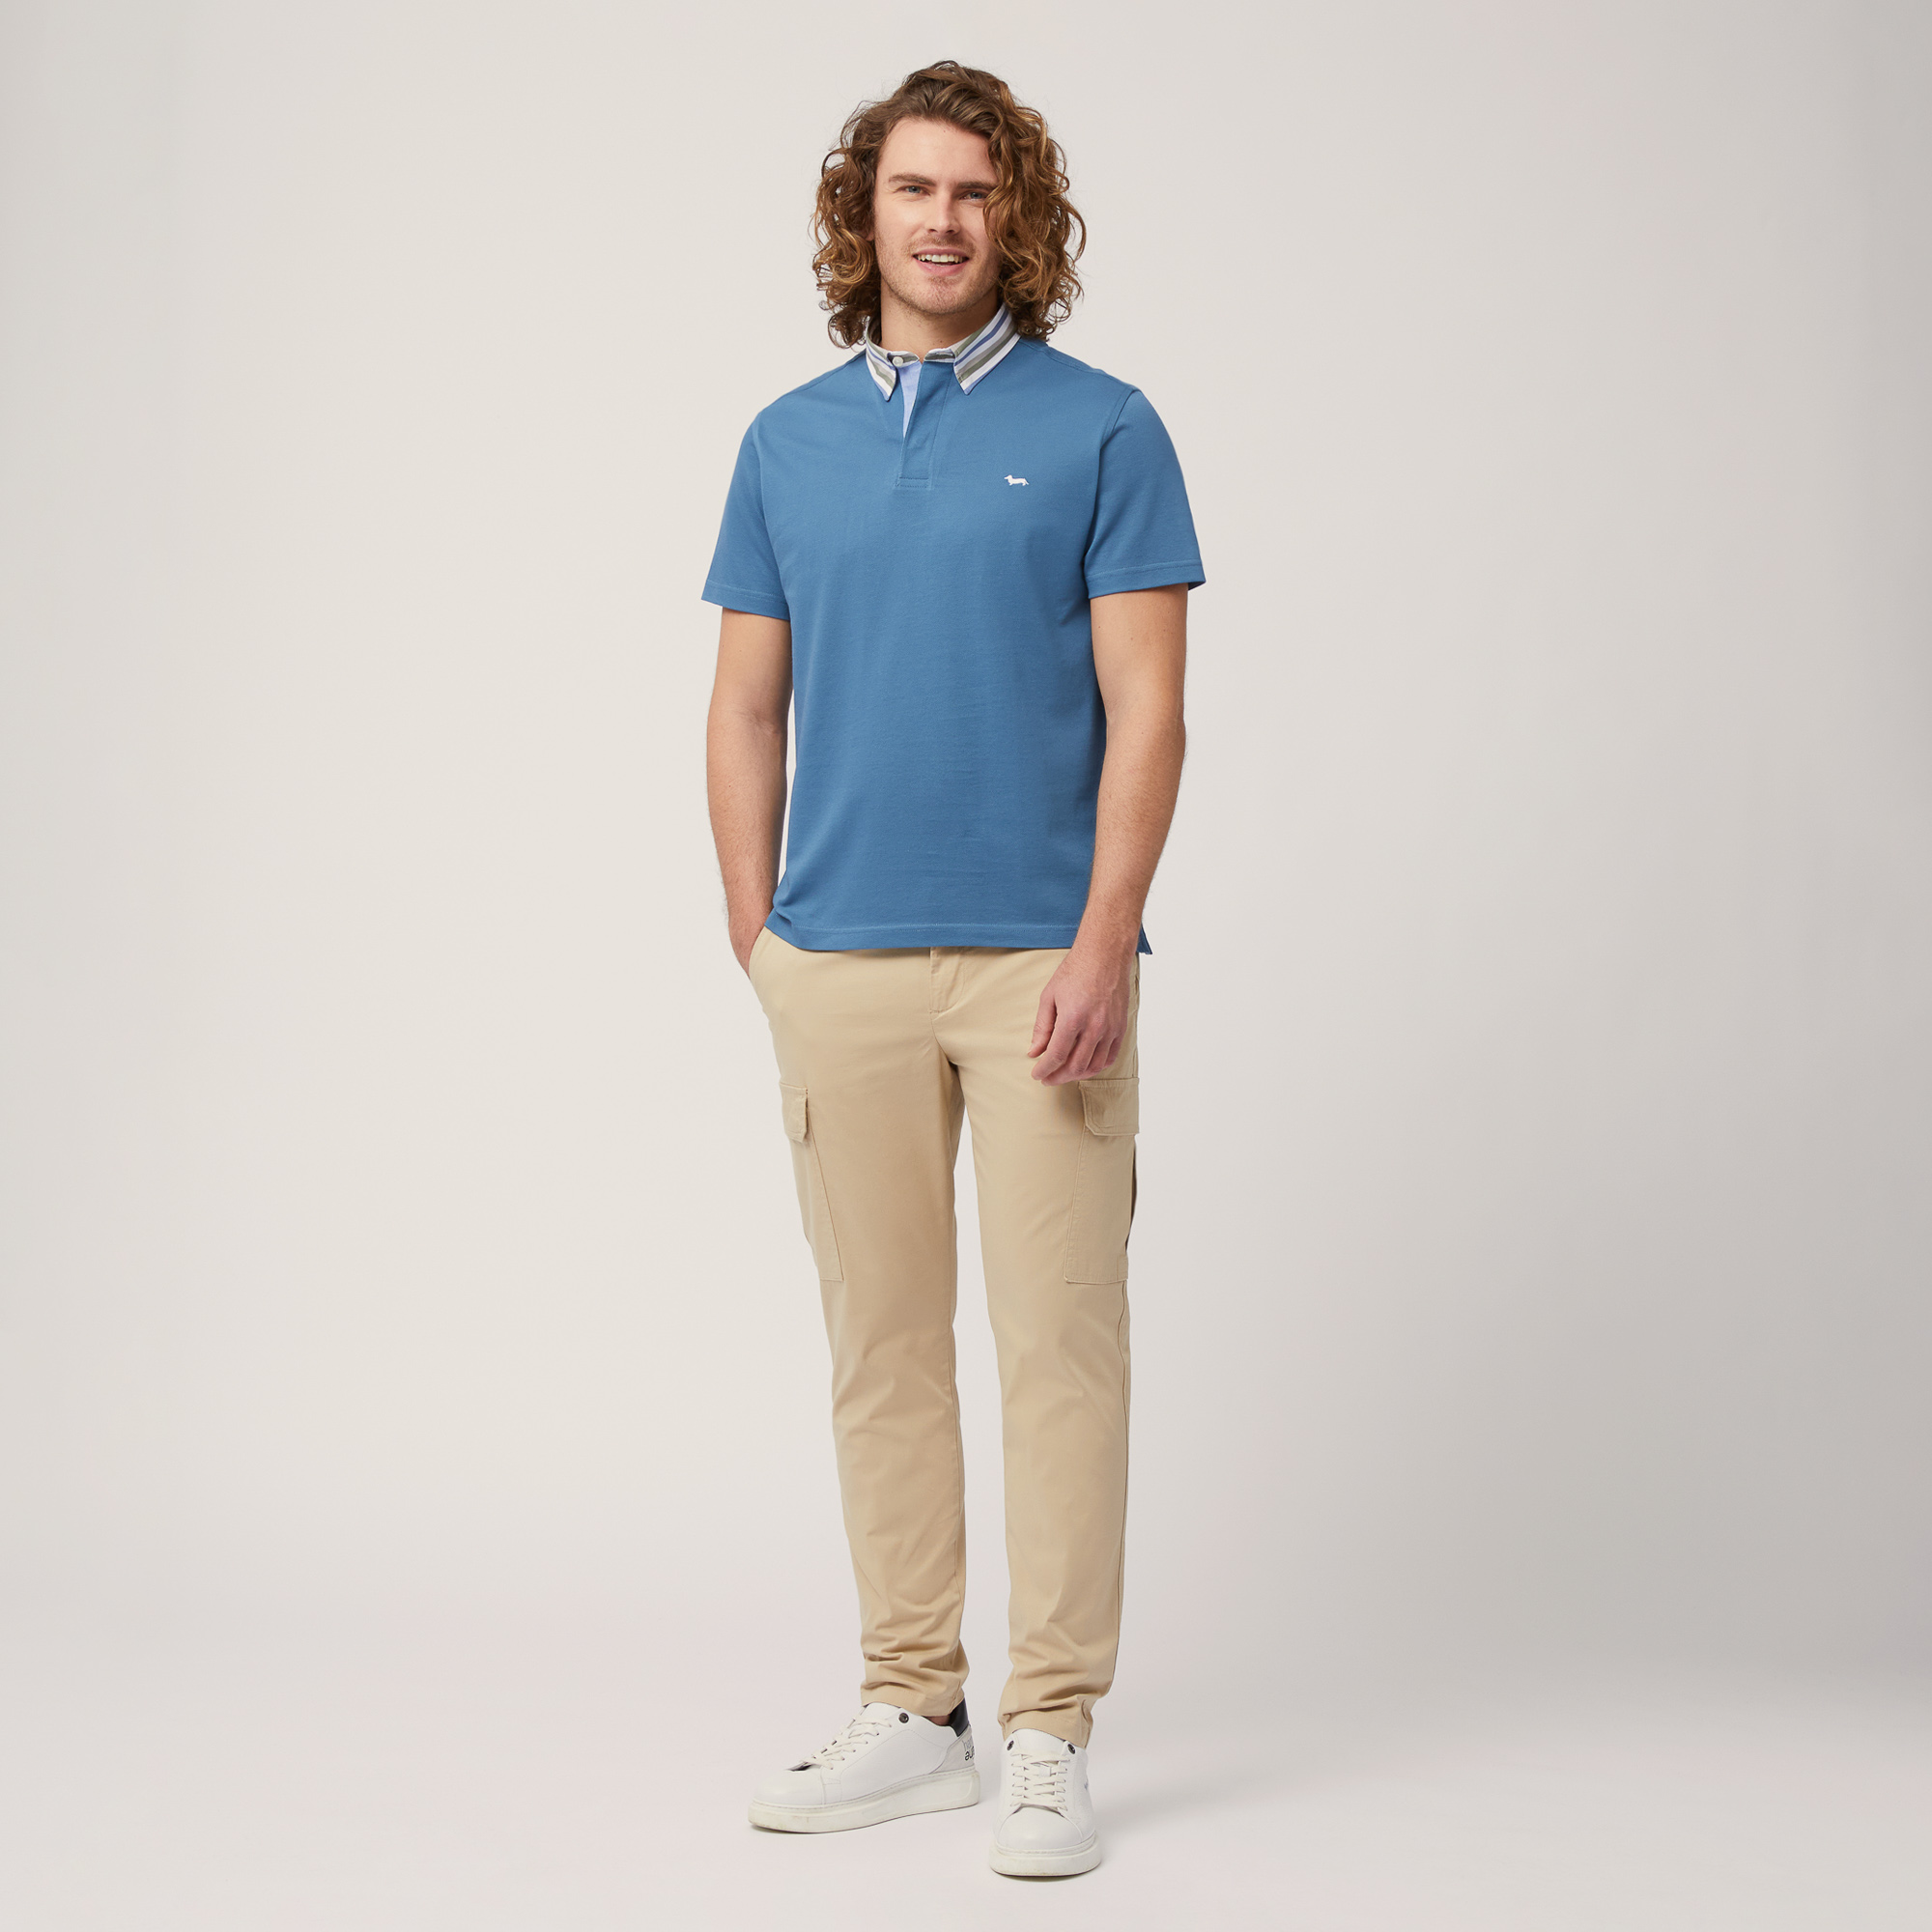 Vietri Polo Shirt with Striped Collar, Blue, large image number 3